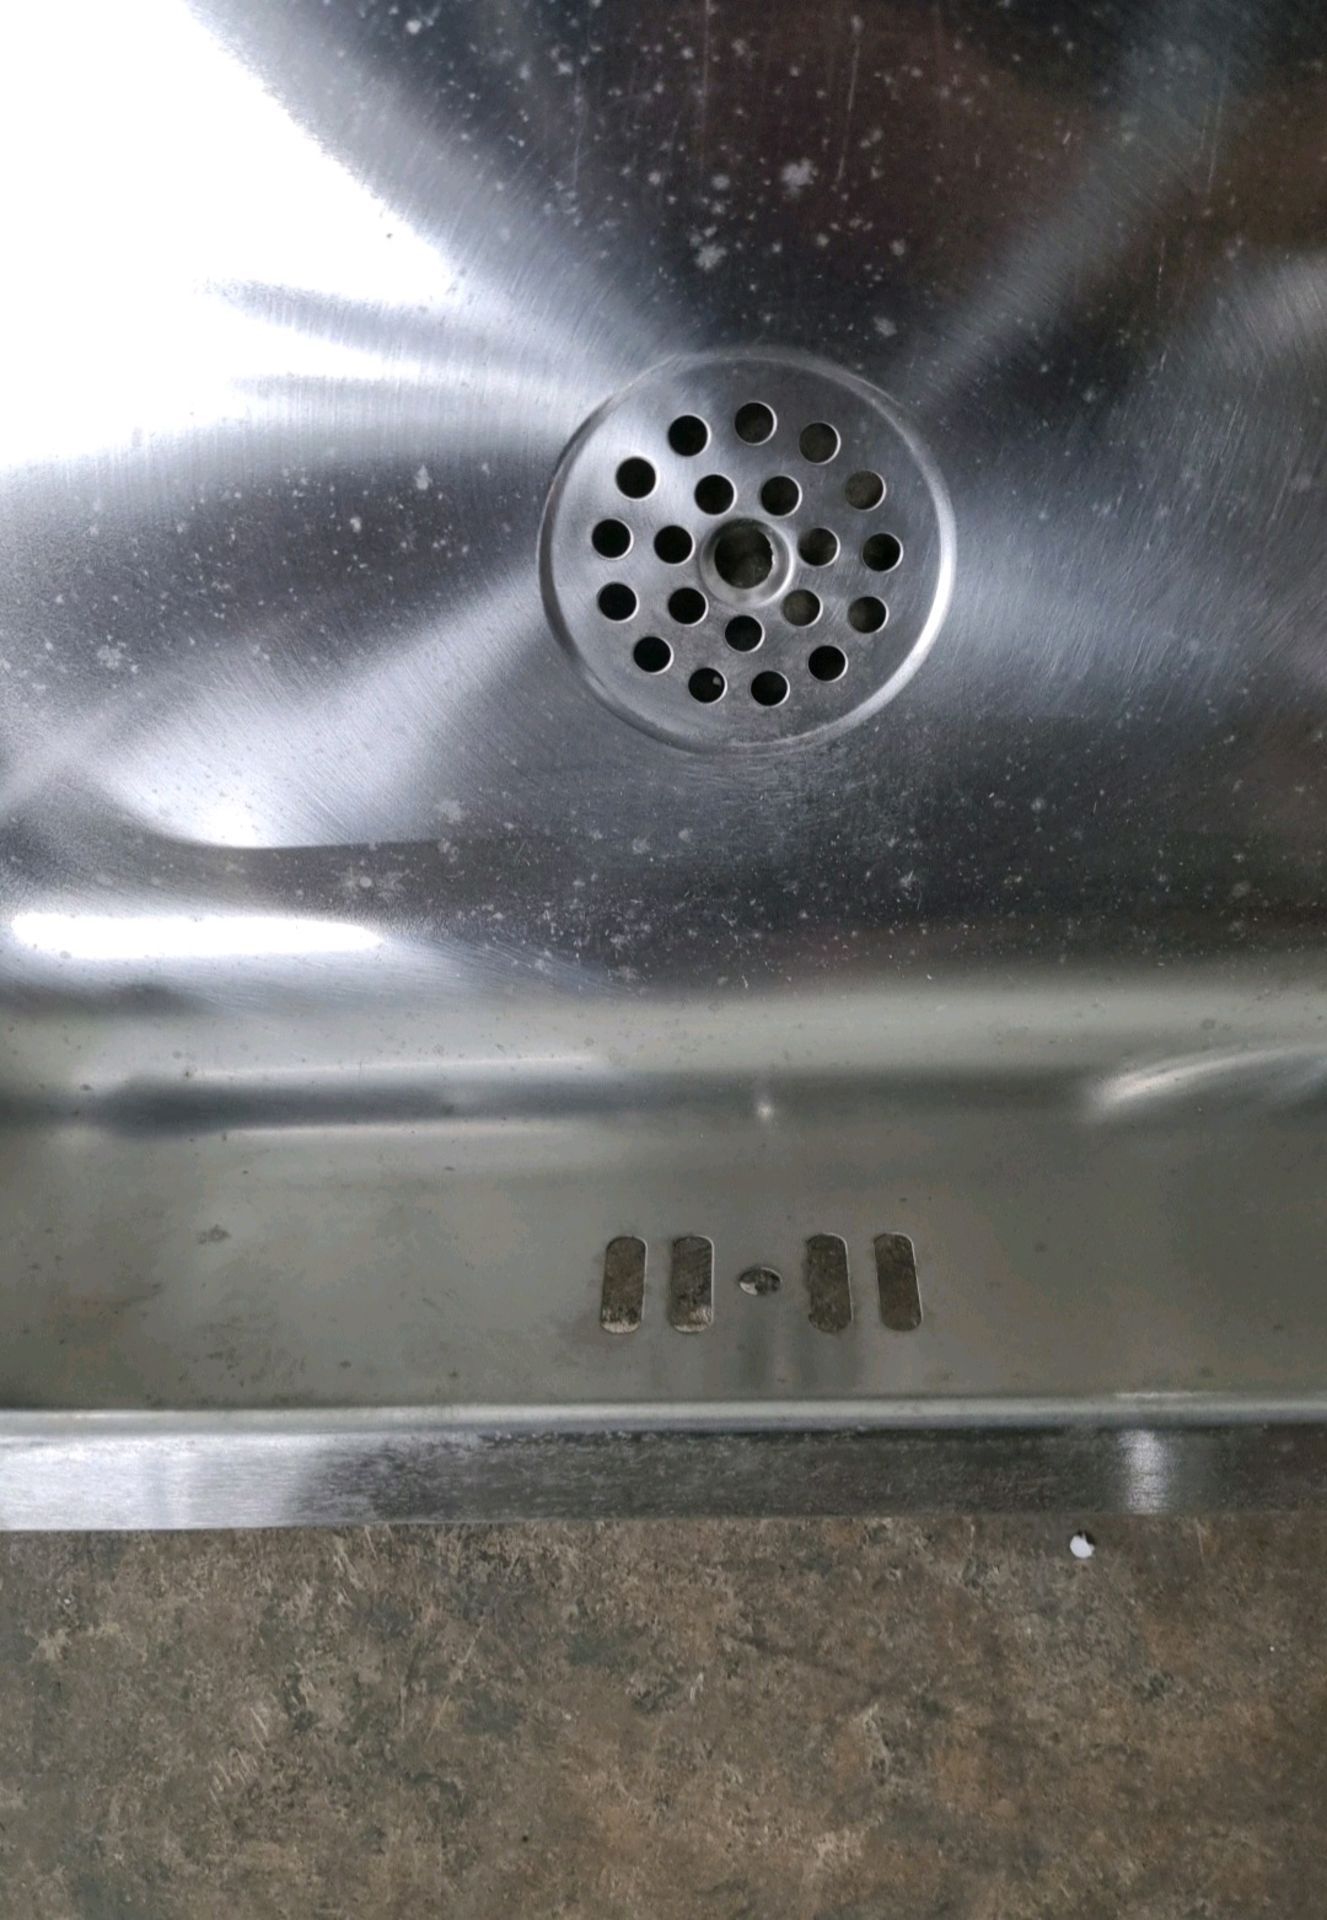 Panda SEK400-100 Stainless Steel Single Bowl Inset Sink With Clips 400mm x 540mm - Image 4 of 7